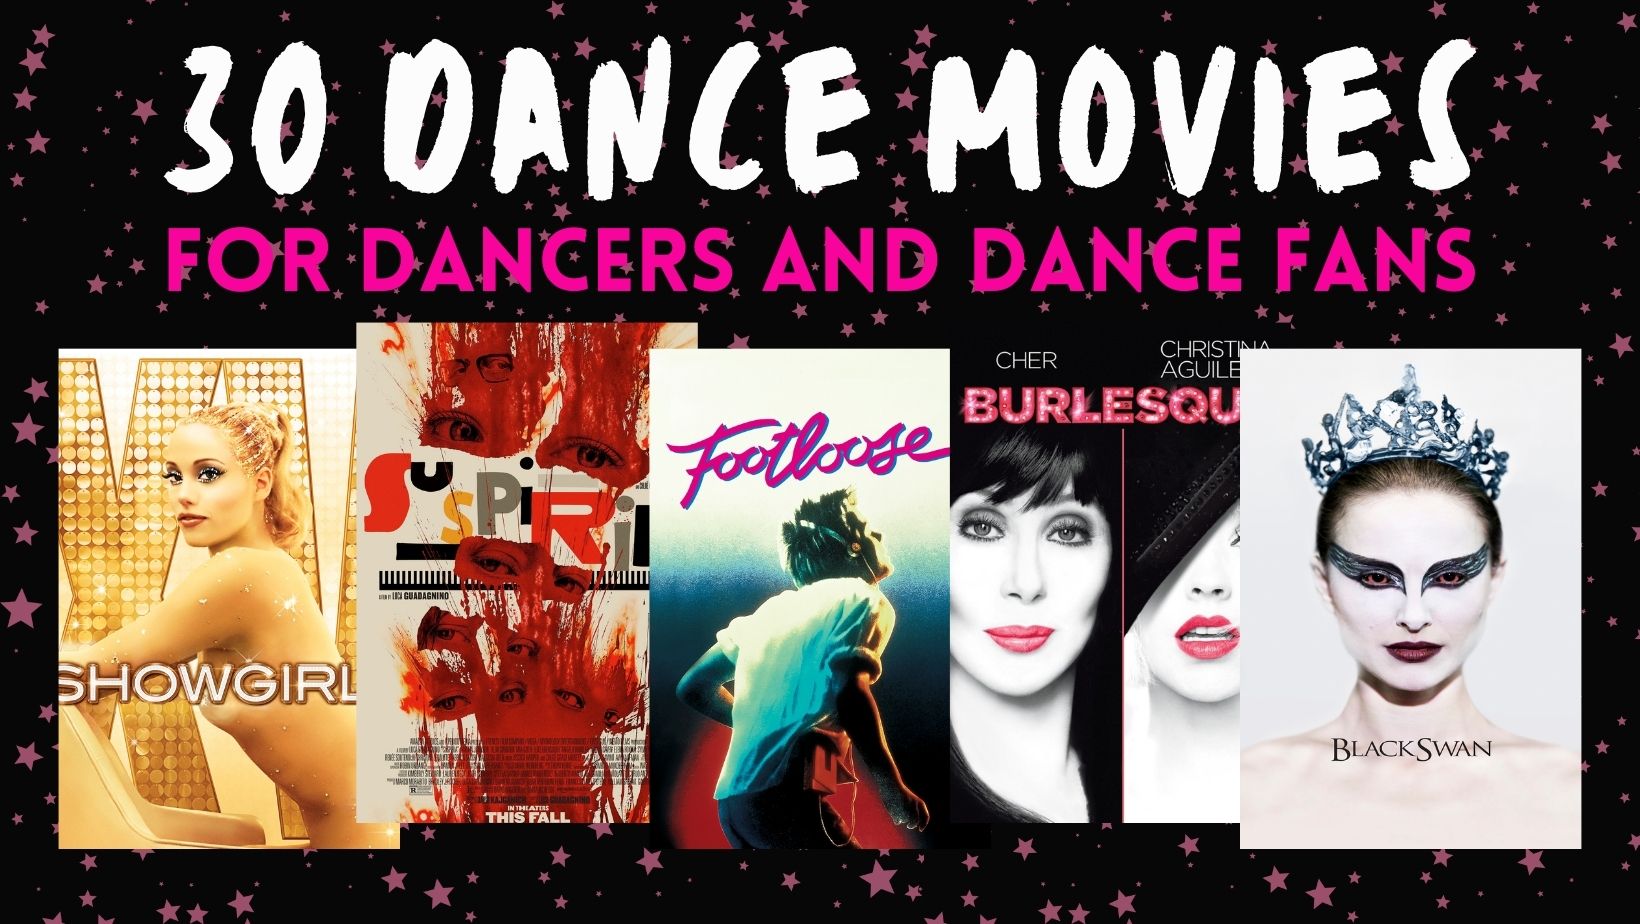 30 Dance Movies for Dancers and Dance Fans